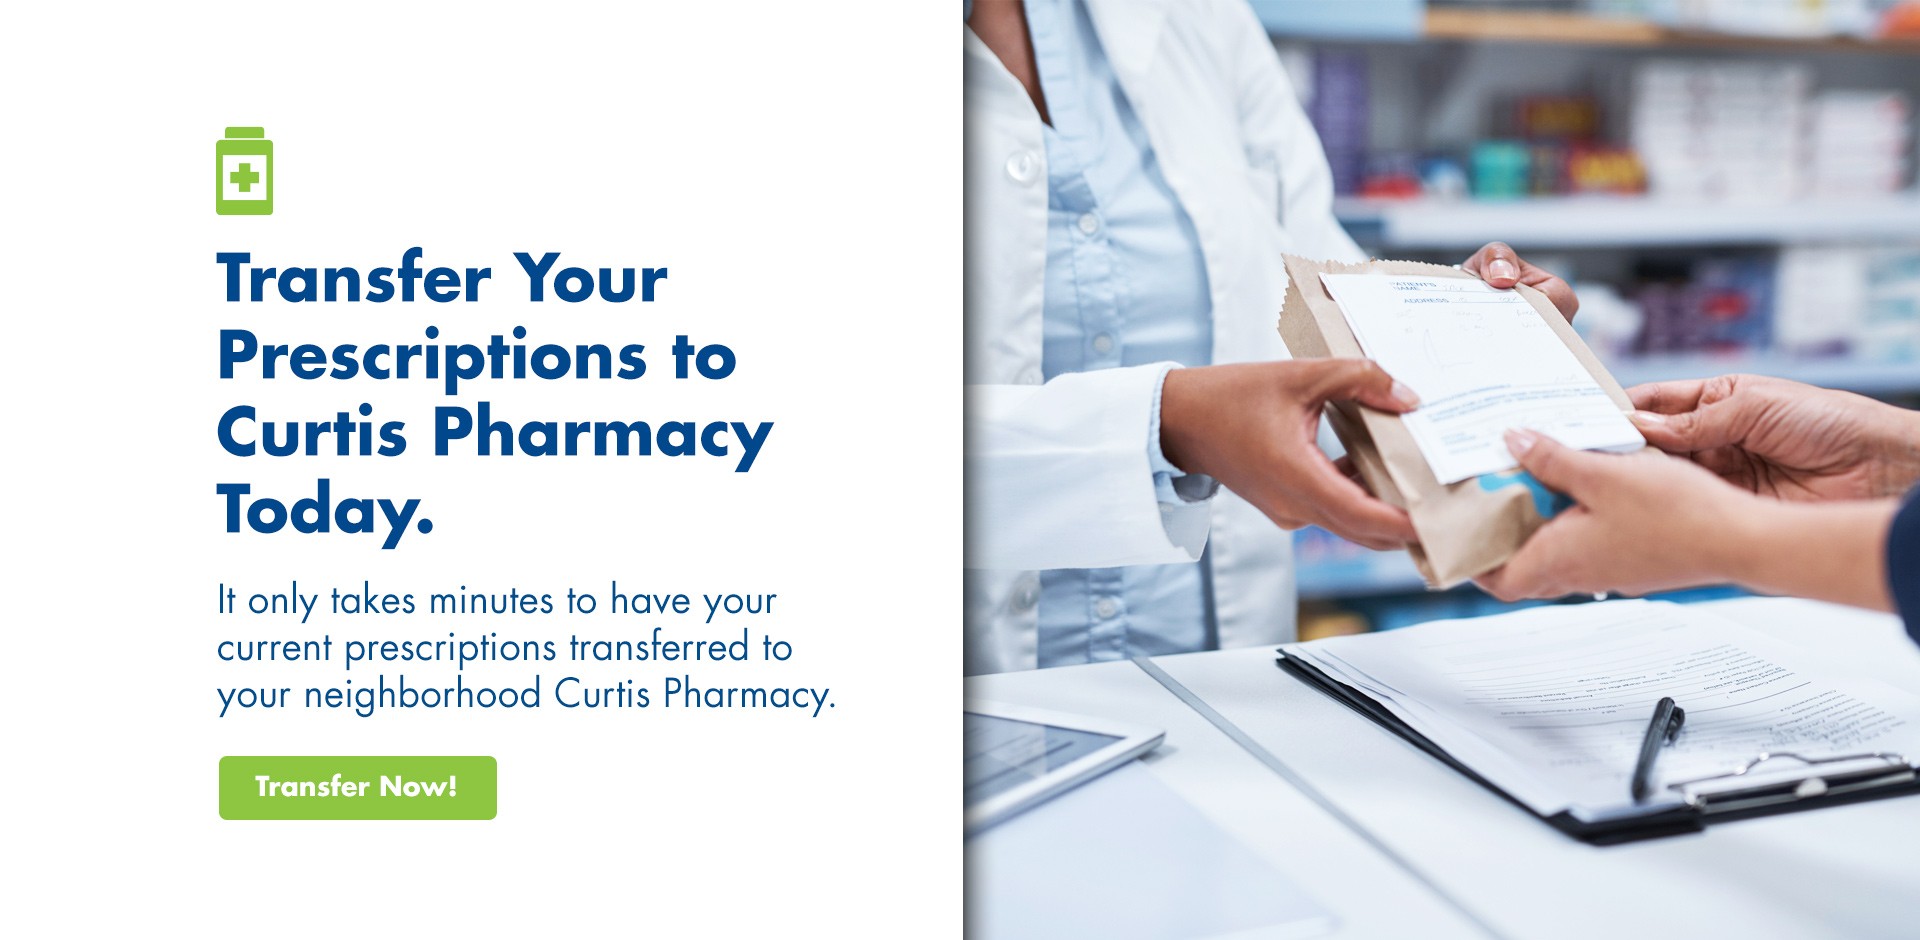 Transfer Your Prescriptions to Curtis Pharmacy Today.